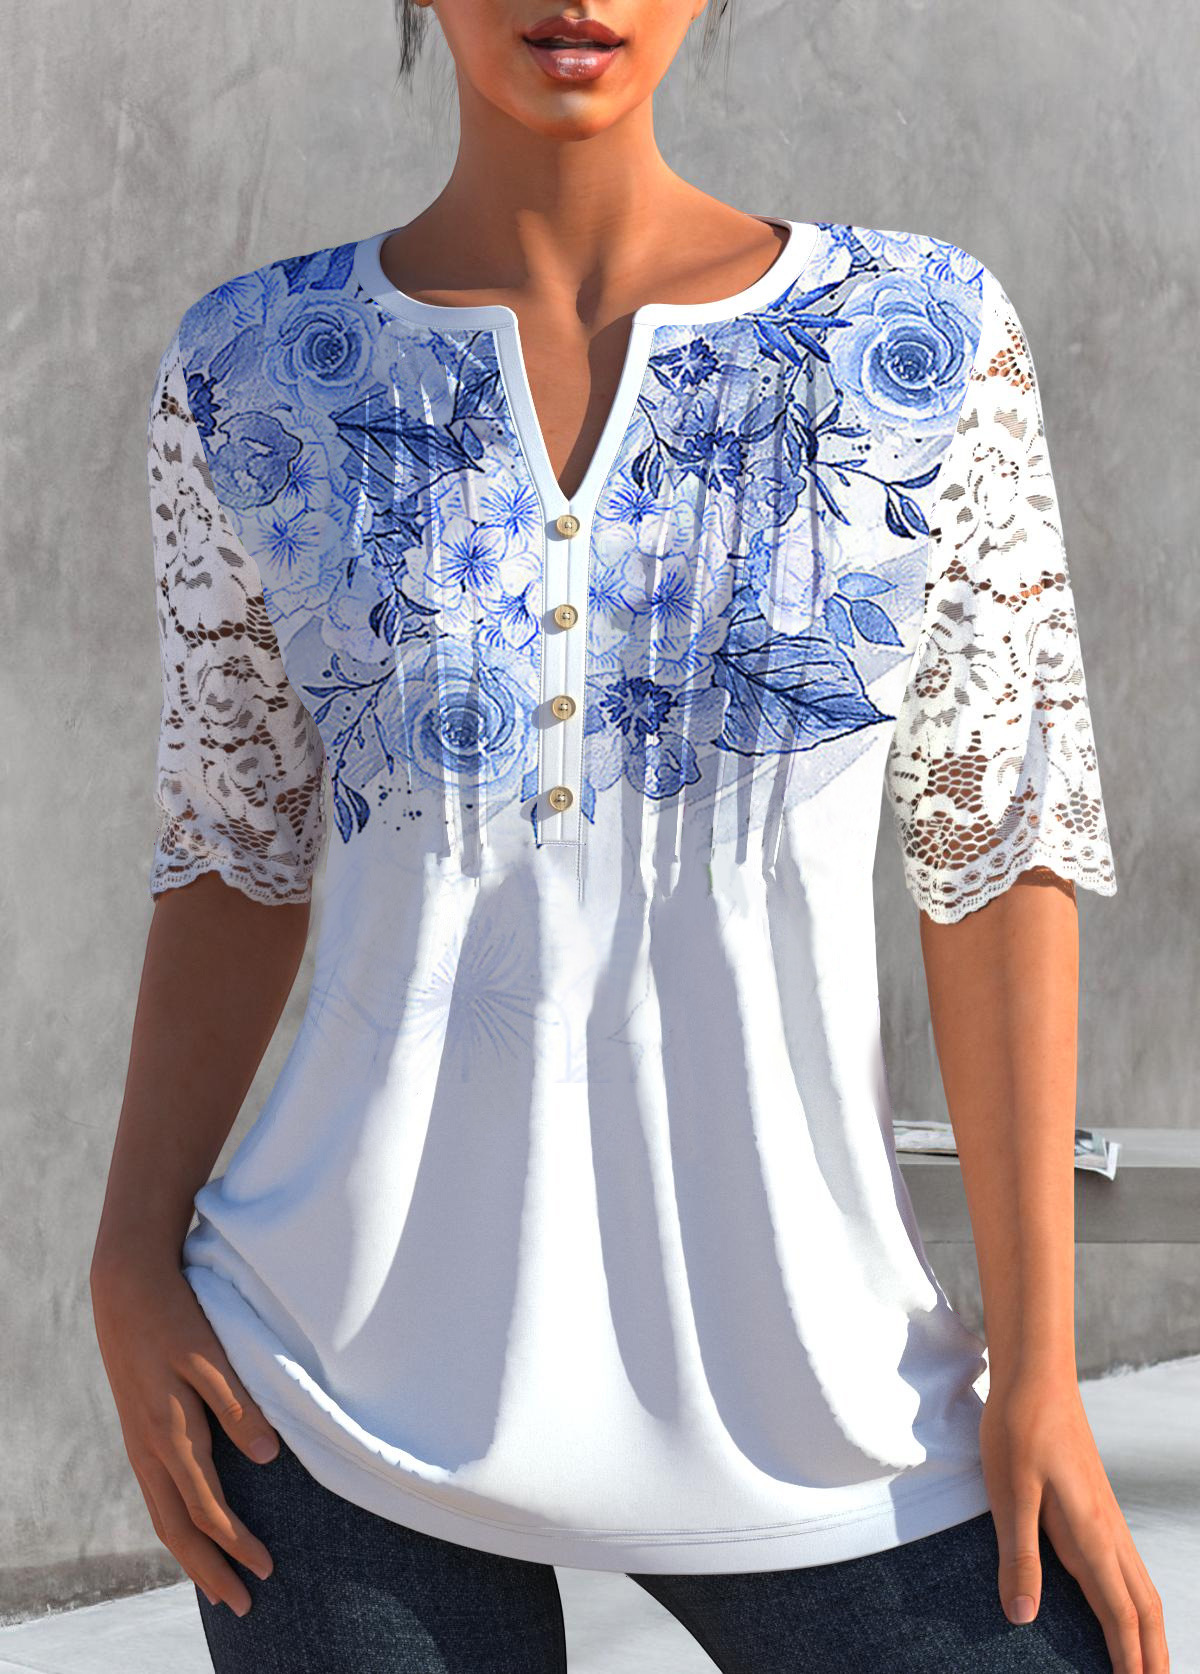 women's spring summer top lace half sleeve v-neck butterfly floral shirt